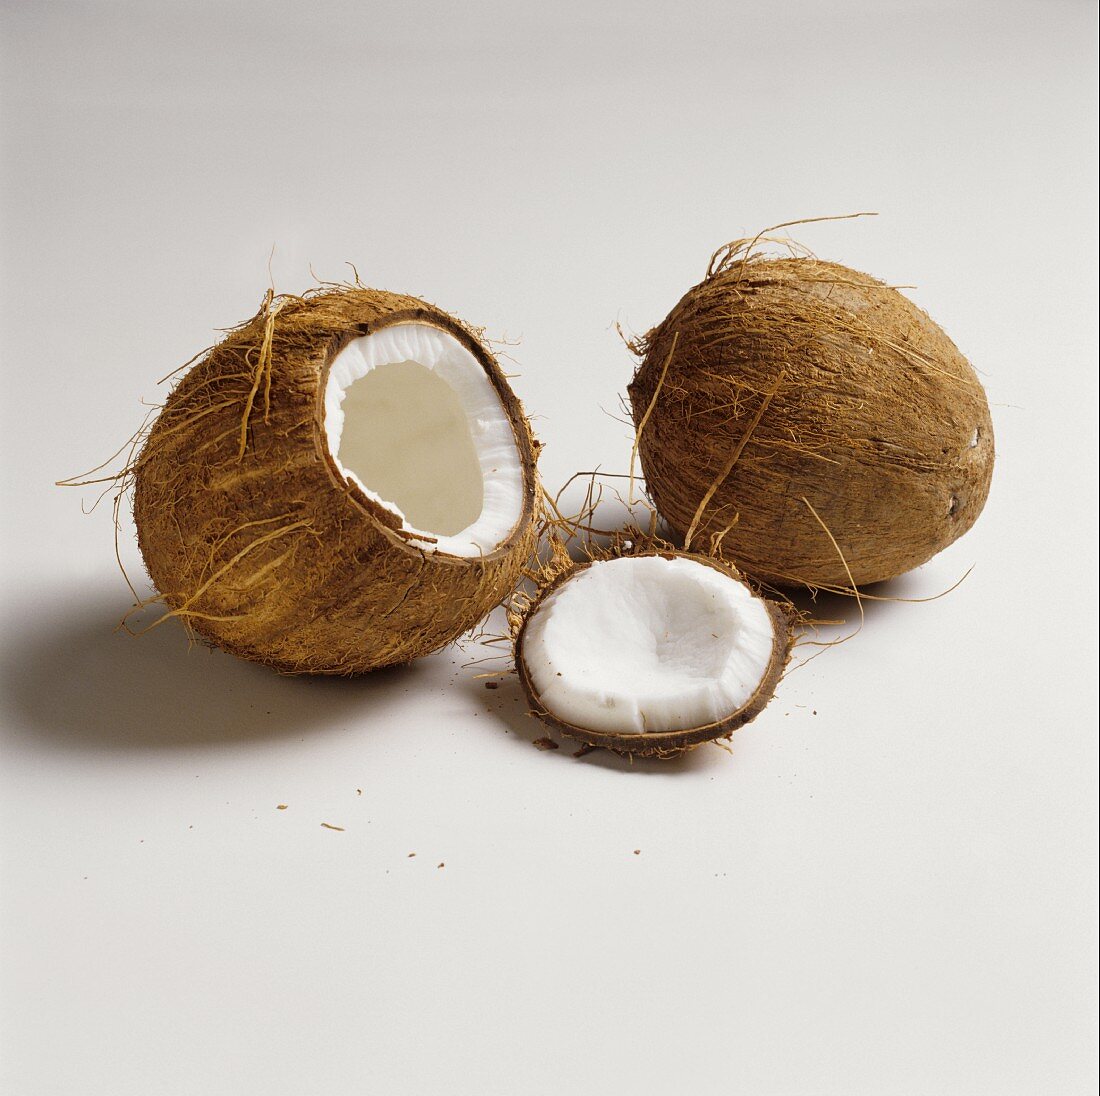 Two Coconuts; One Whole and One with Top Cut Off